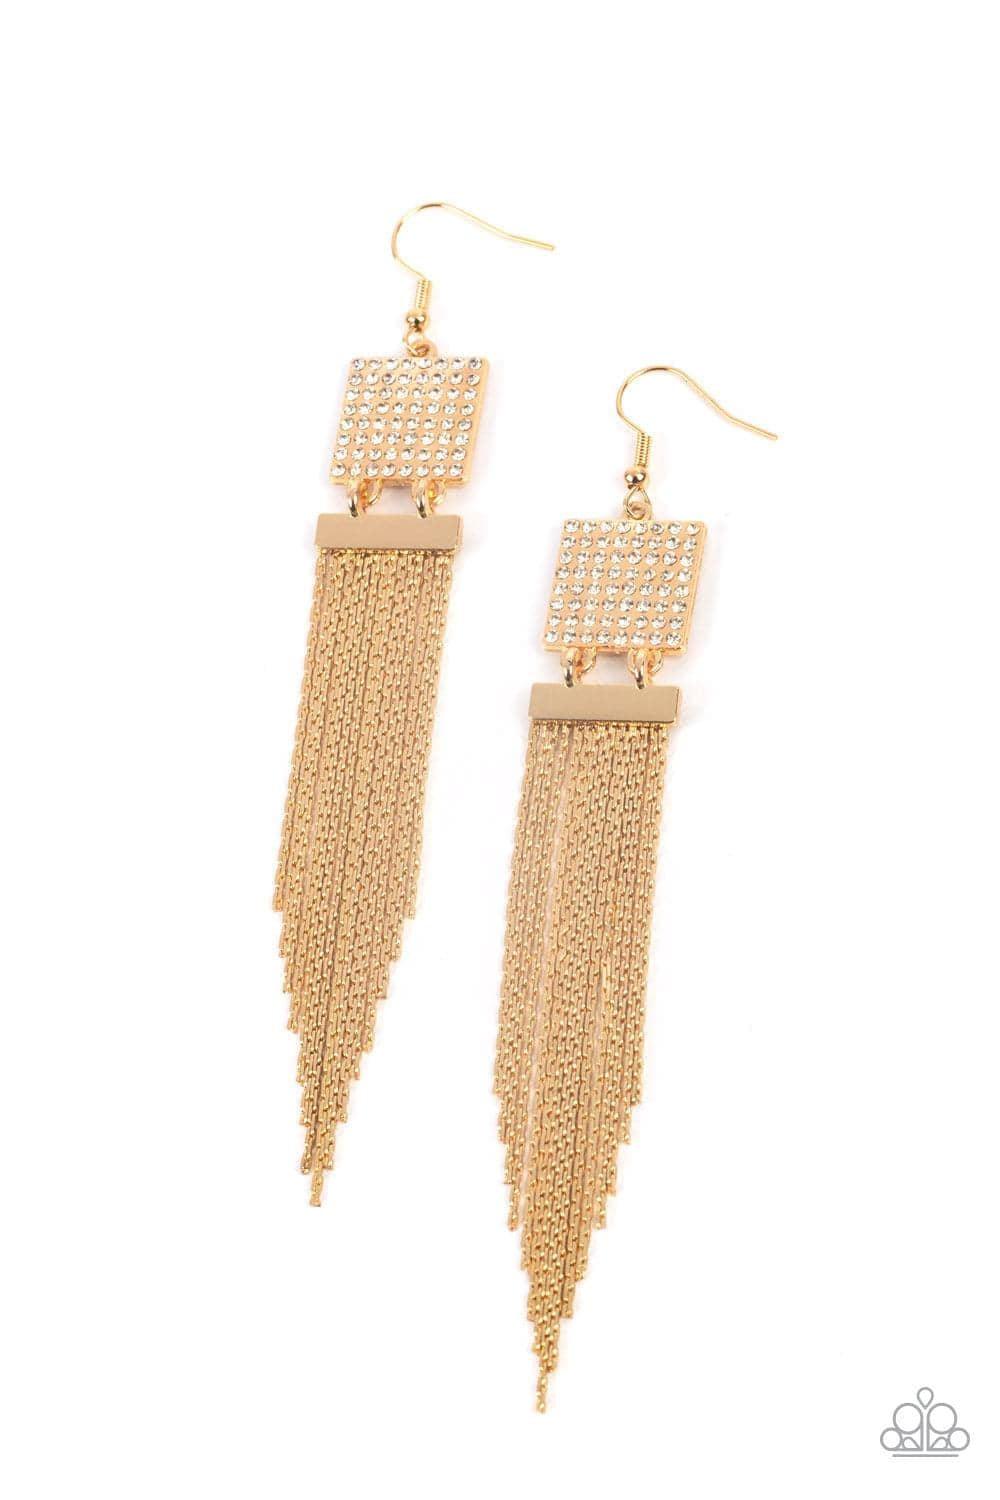 Paparazzi Accessories - Dramatically Deco - Gold Earrings - Bling by JessieK